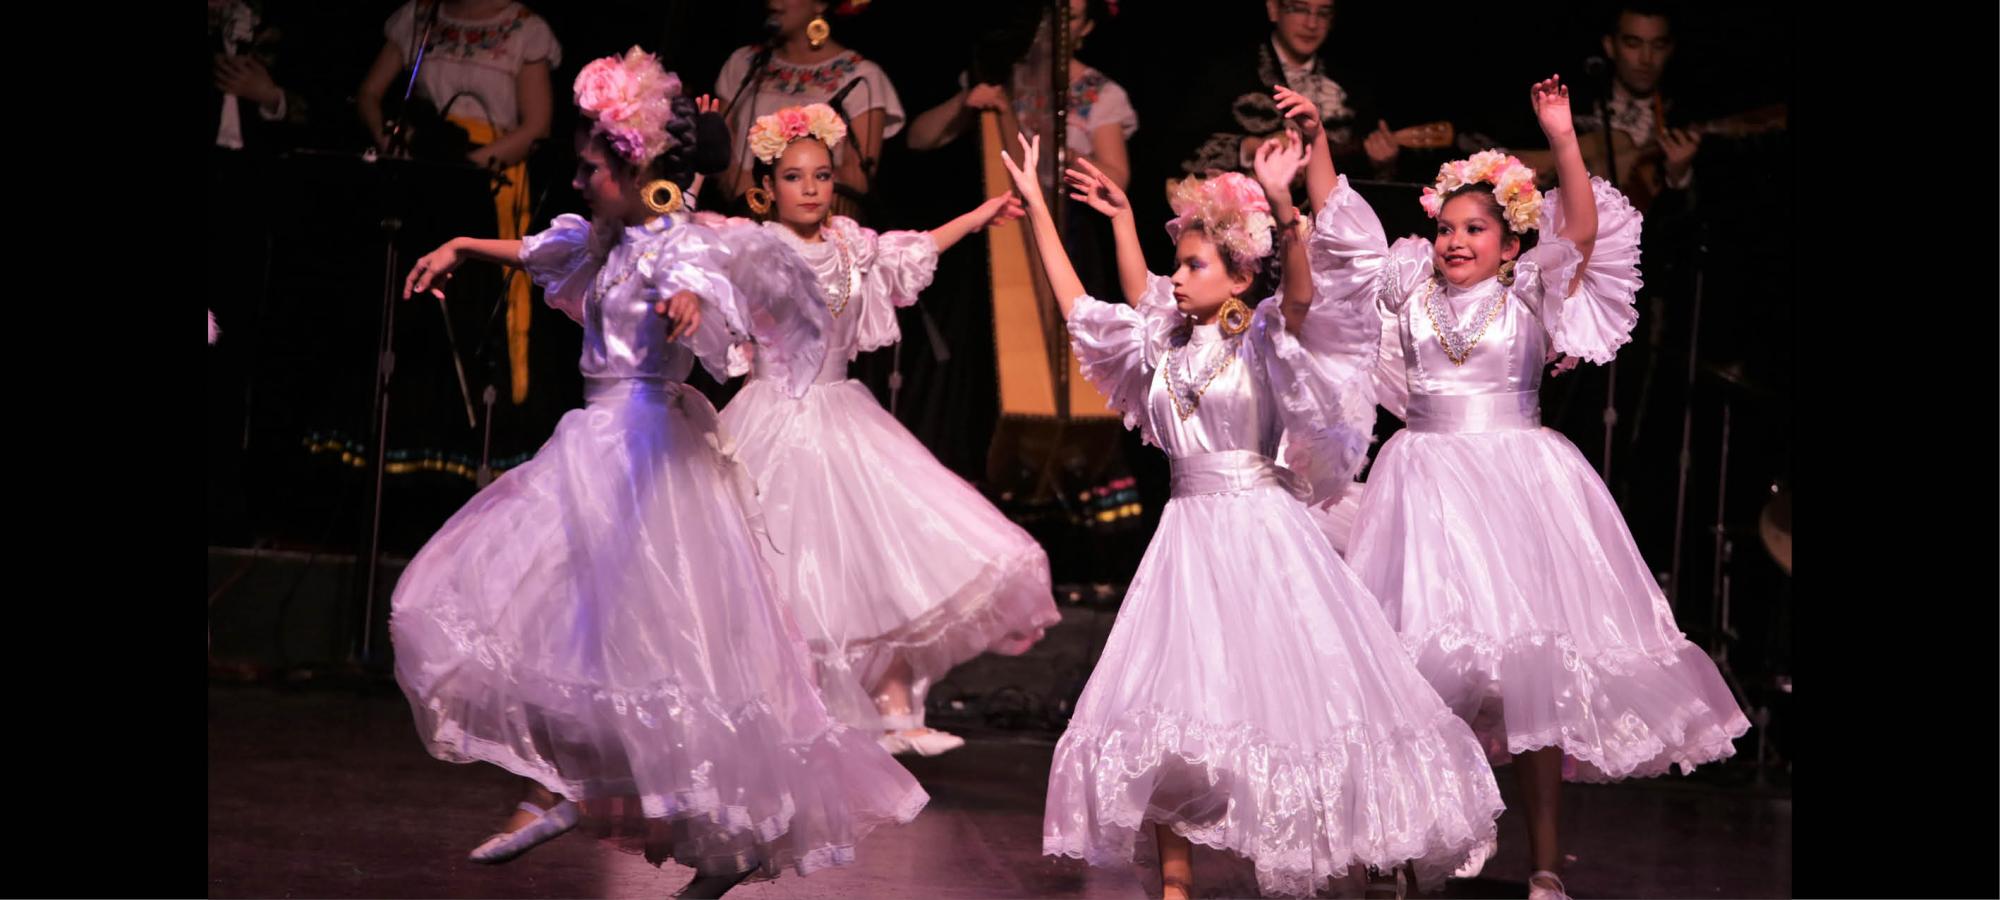 Four young ballerinas dancing on stage.